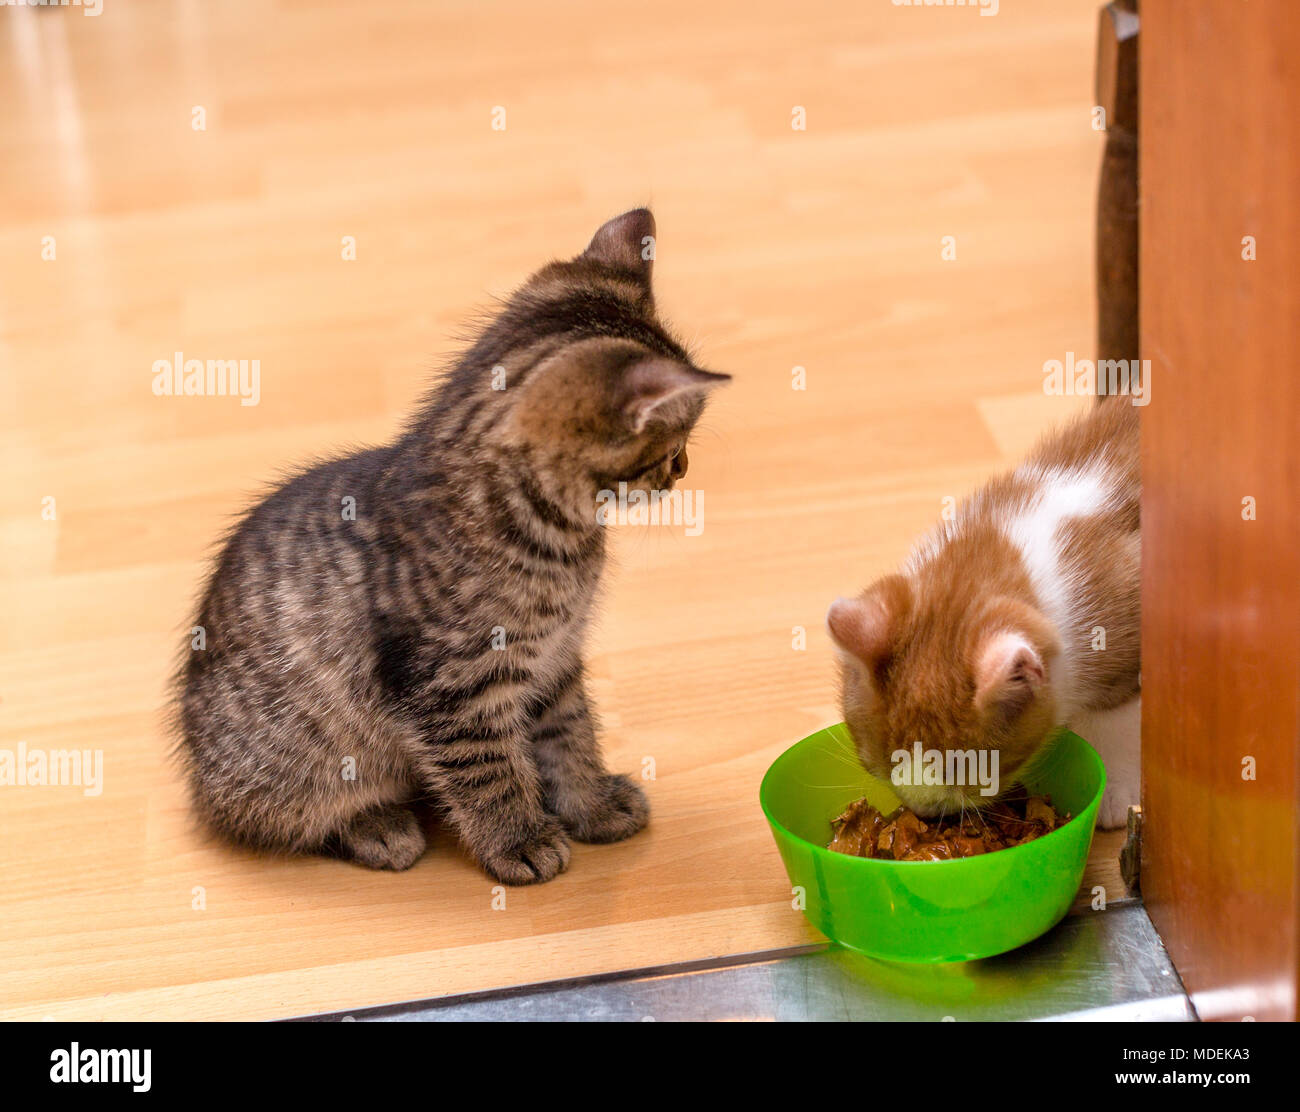 A ginger and white kitten eating a soft canned cat food from a green bowl. Tabby kitten sitting and looking. Two little cute kittens Stock Photo